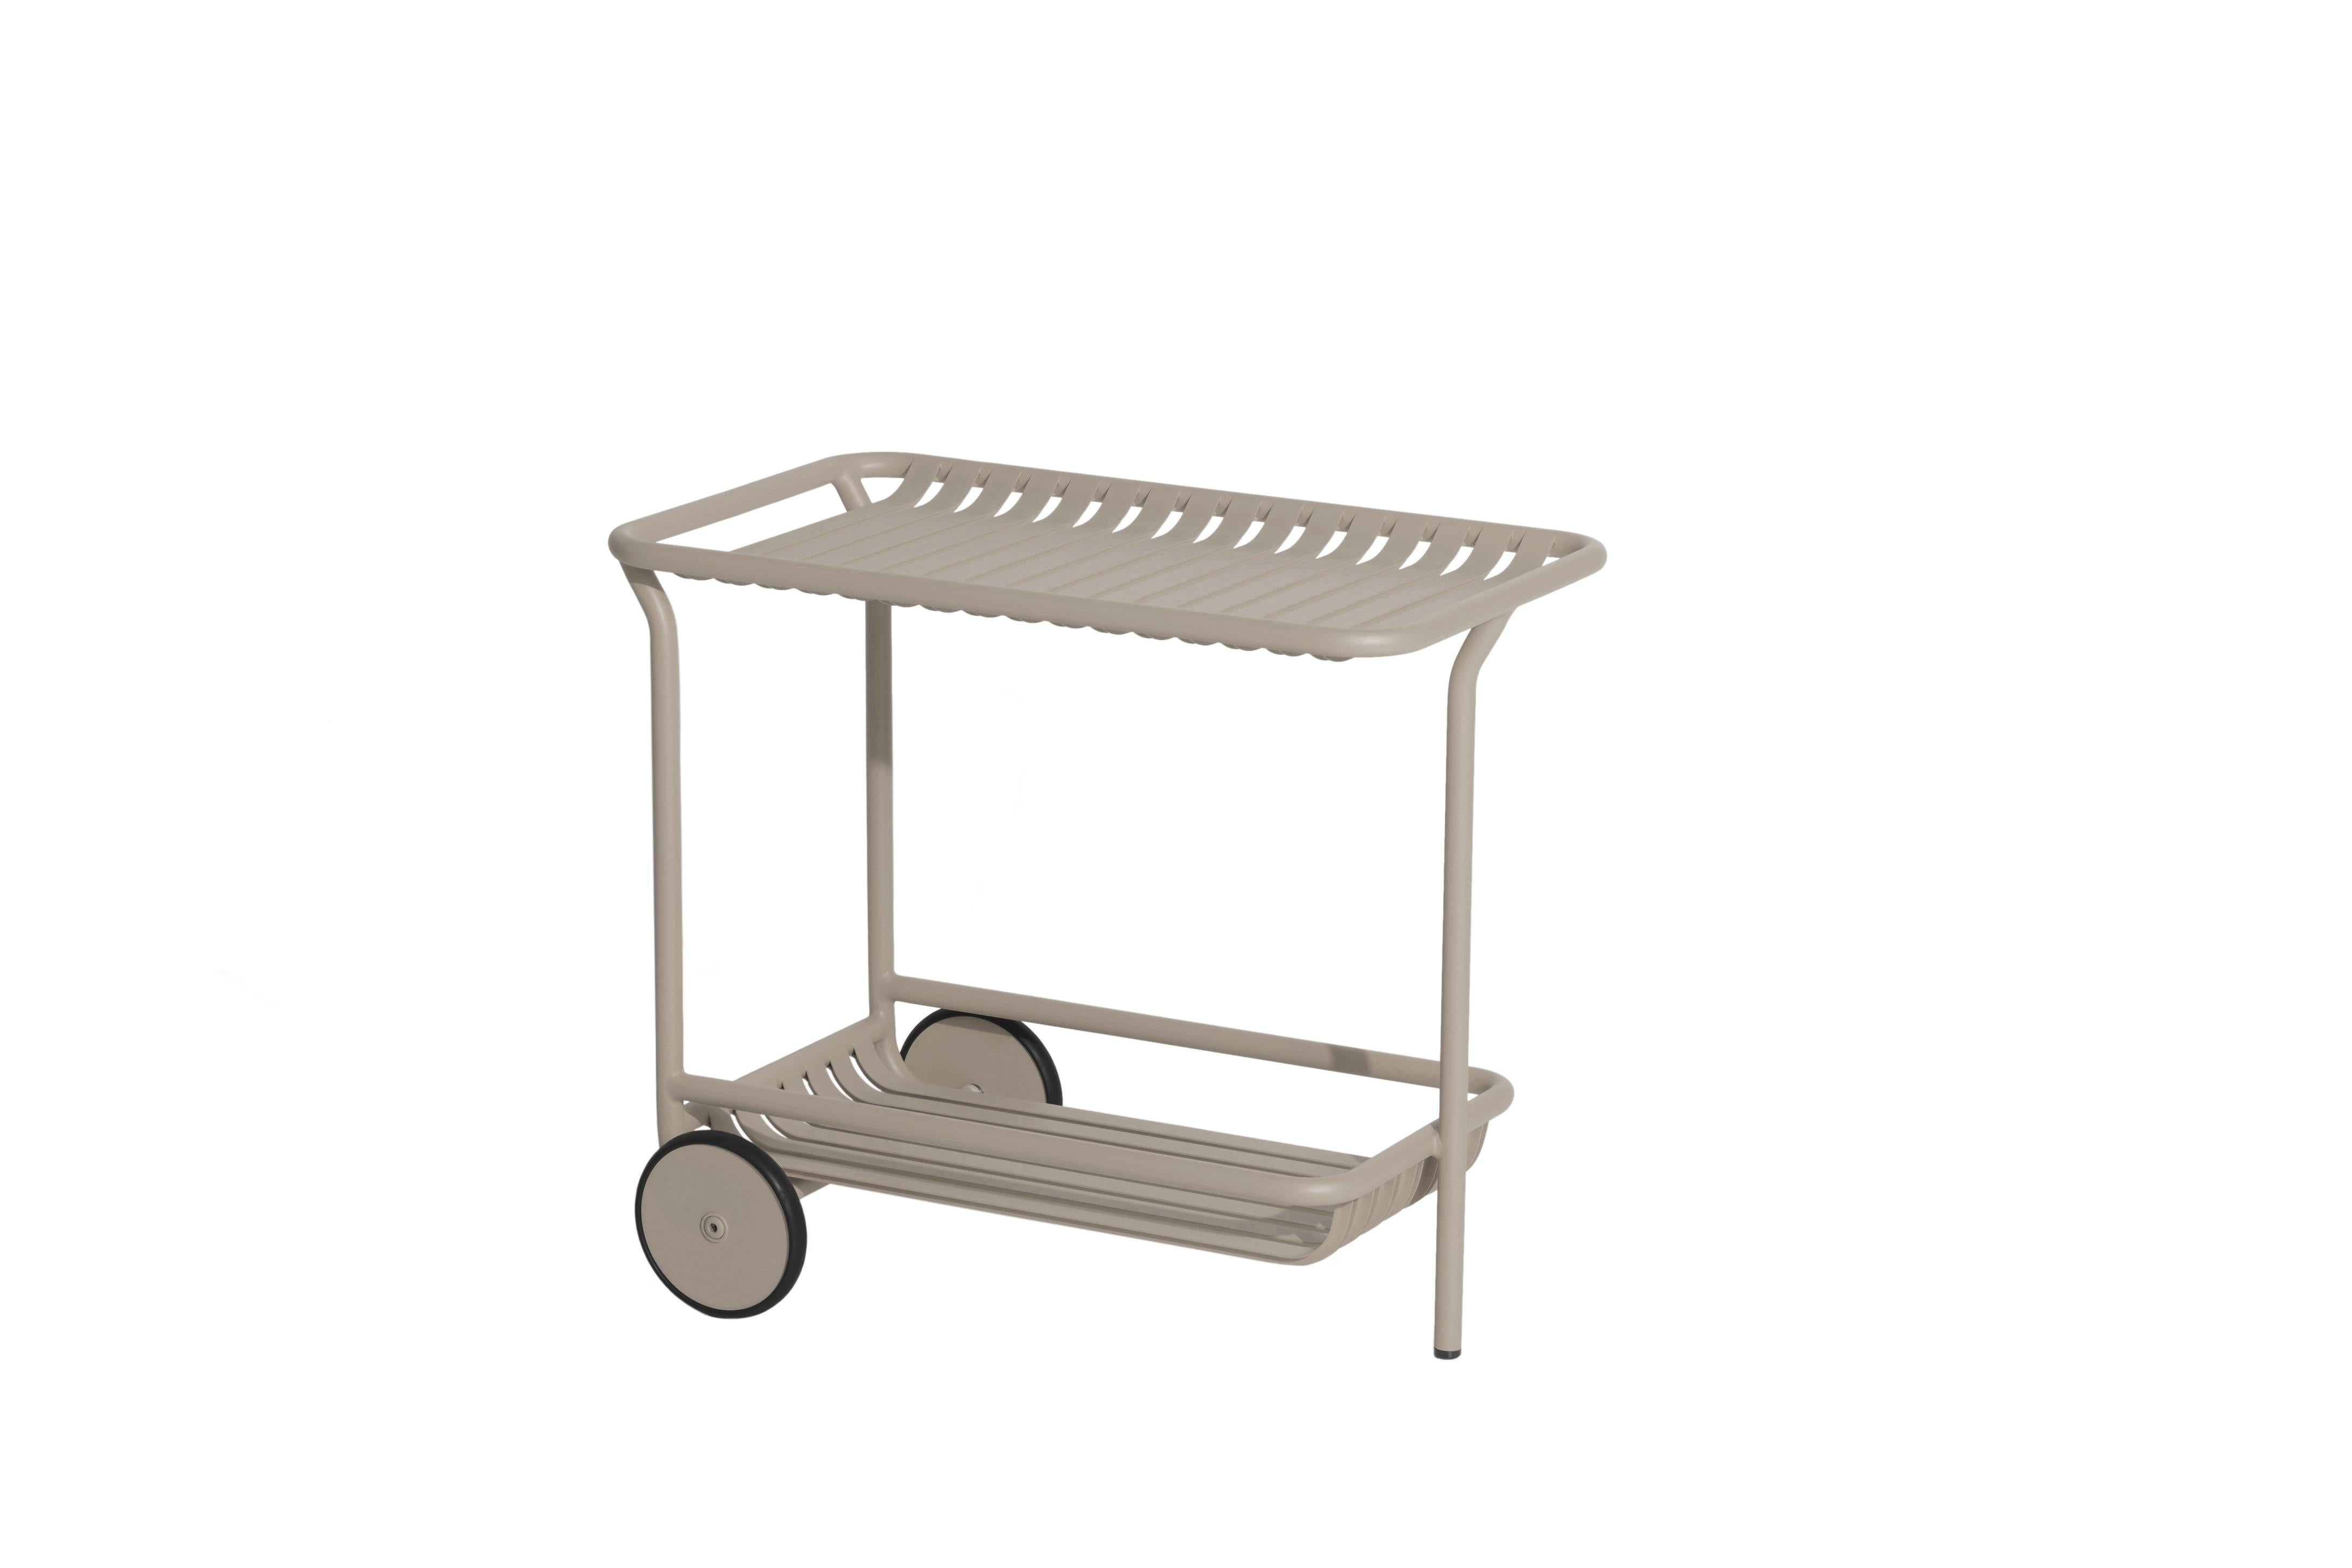 Petite Friture Week-End Trolley in Dune Aluminium by Studio BrichetZiegler, 2017

The week-end collection is a full range of outdoor furniture, in aluminium grained epoxy paint, matt finish, that includes 18 functions and 8 colours for the retail